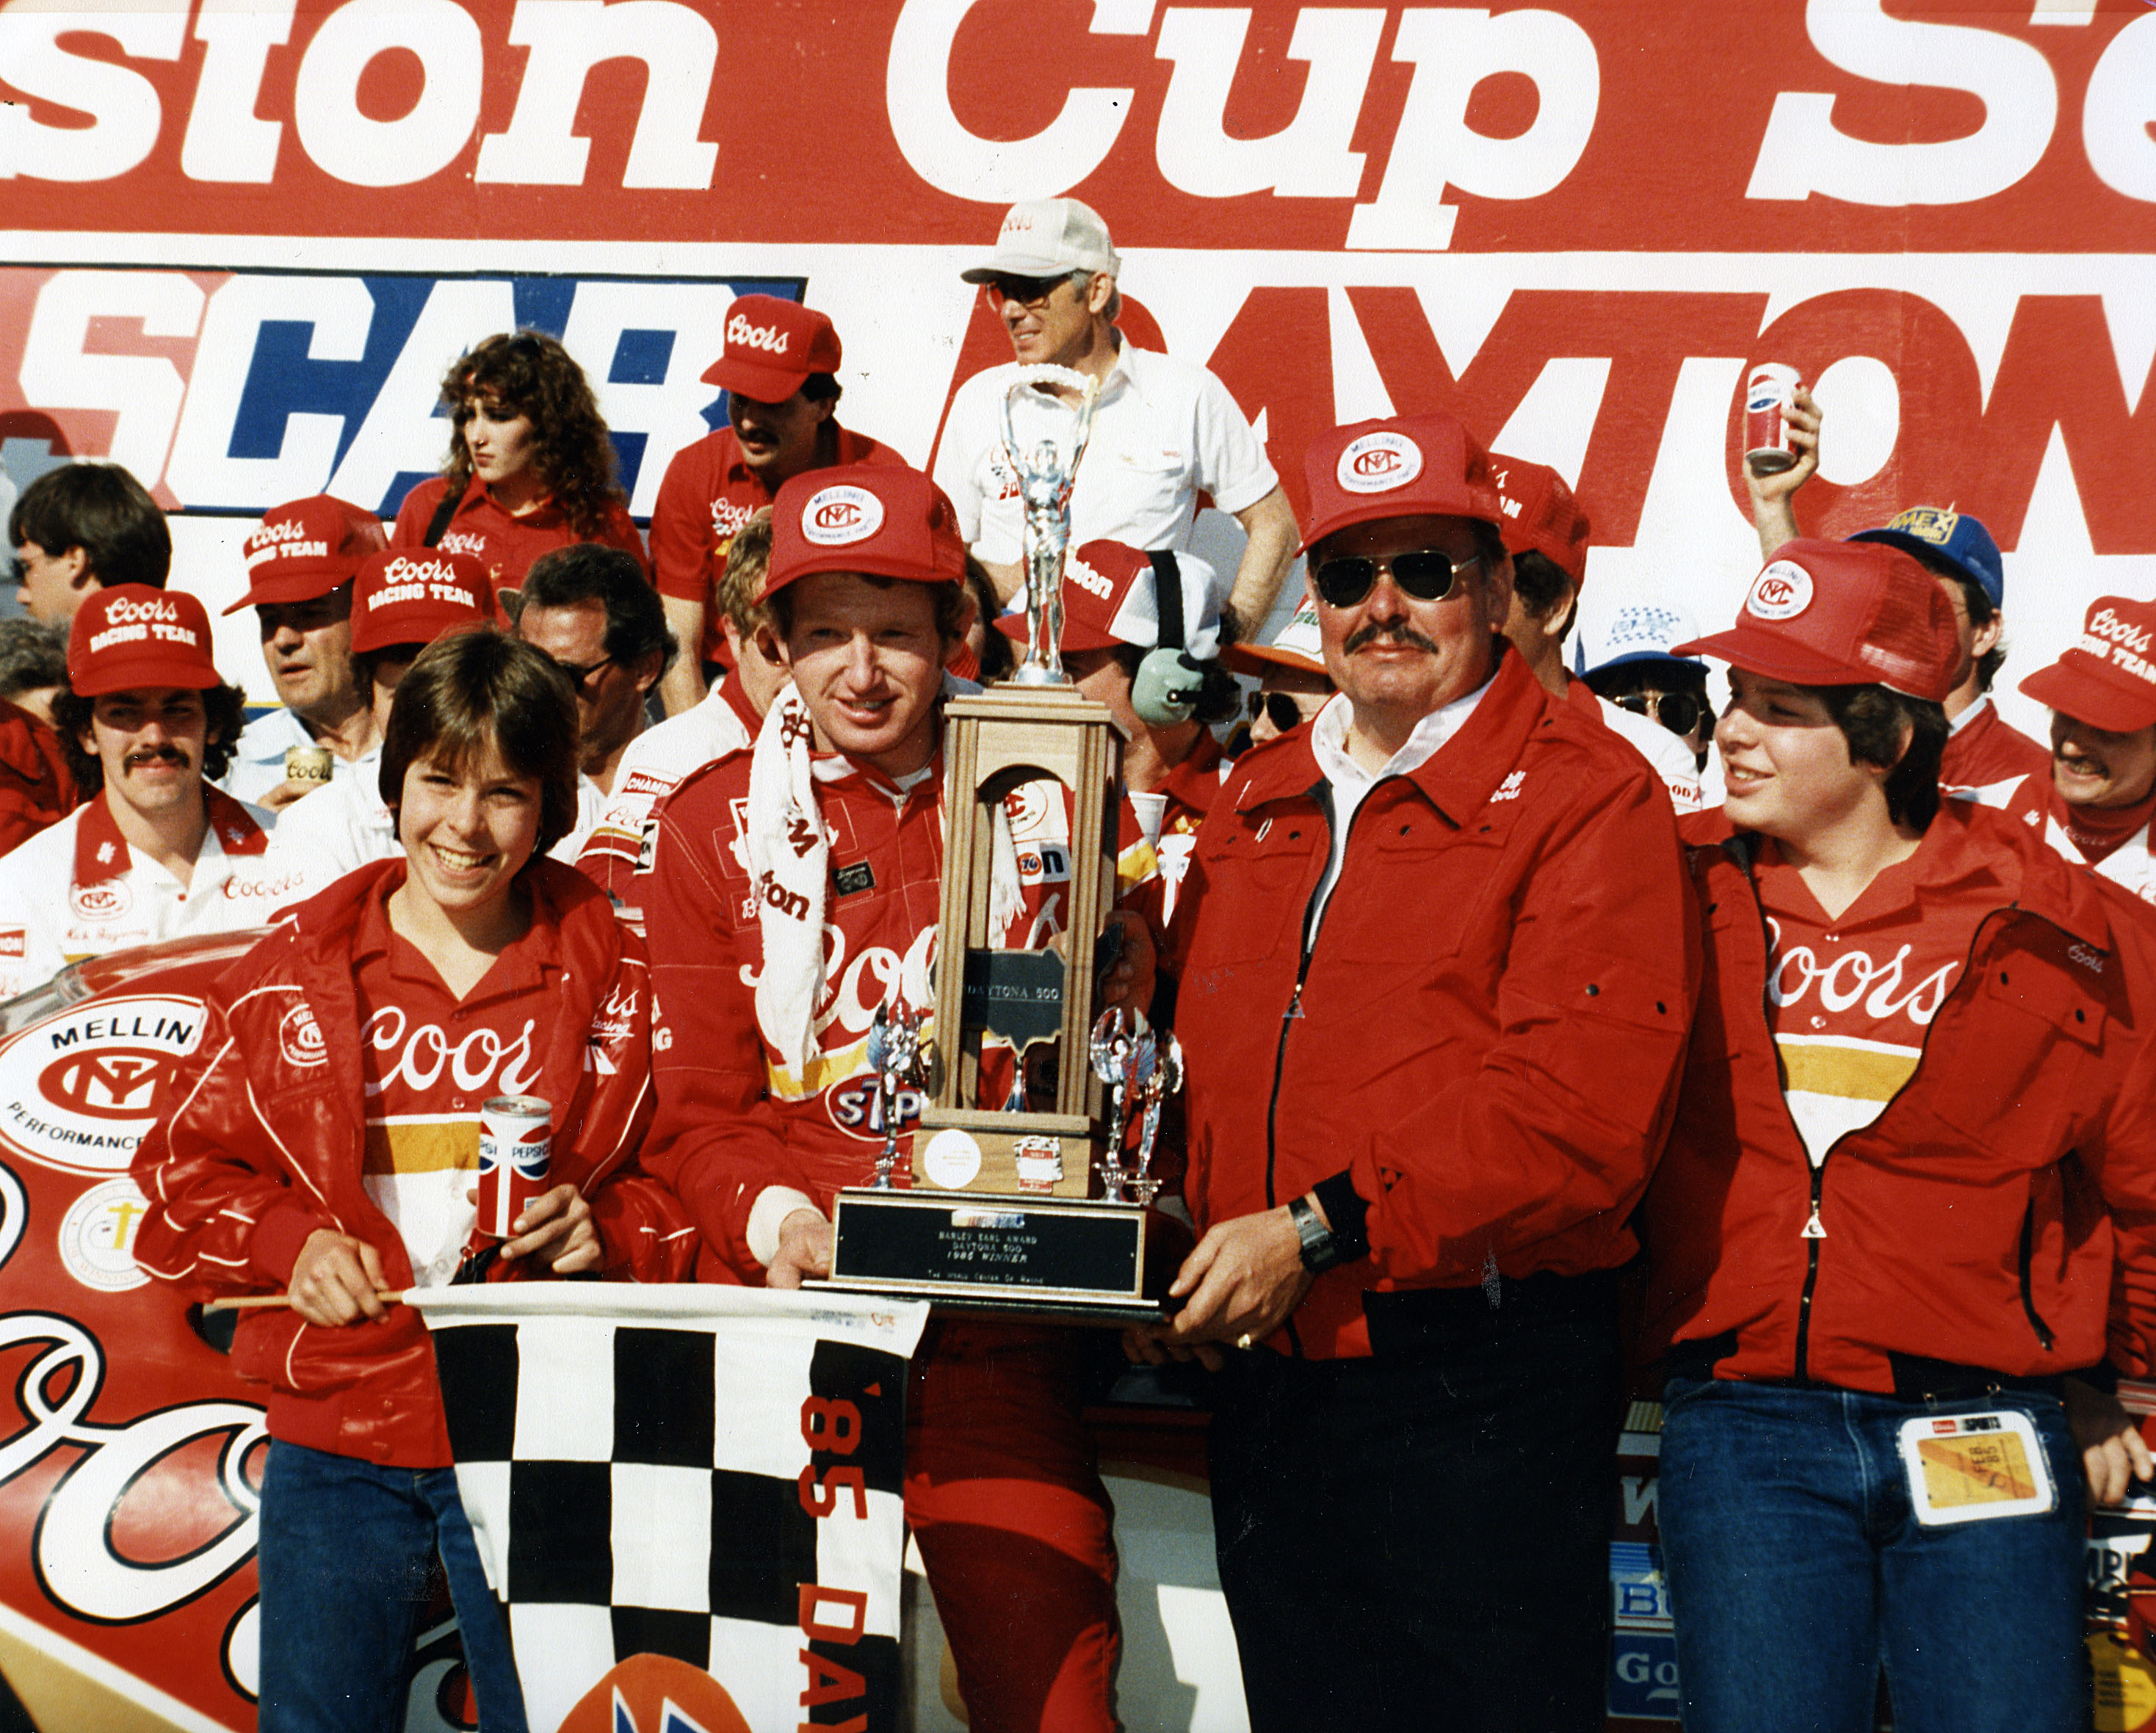 Driver Bill Elliott and his car owner Harry Melling are joined by Melling's sons Matt (far left) and Mark (far right) after Elliott won the Daytona 500 NASCAR Cup race at Daytona International Speedway